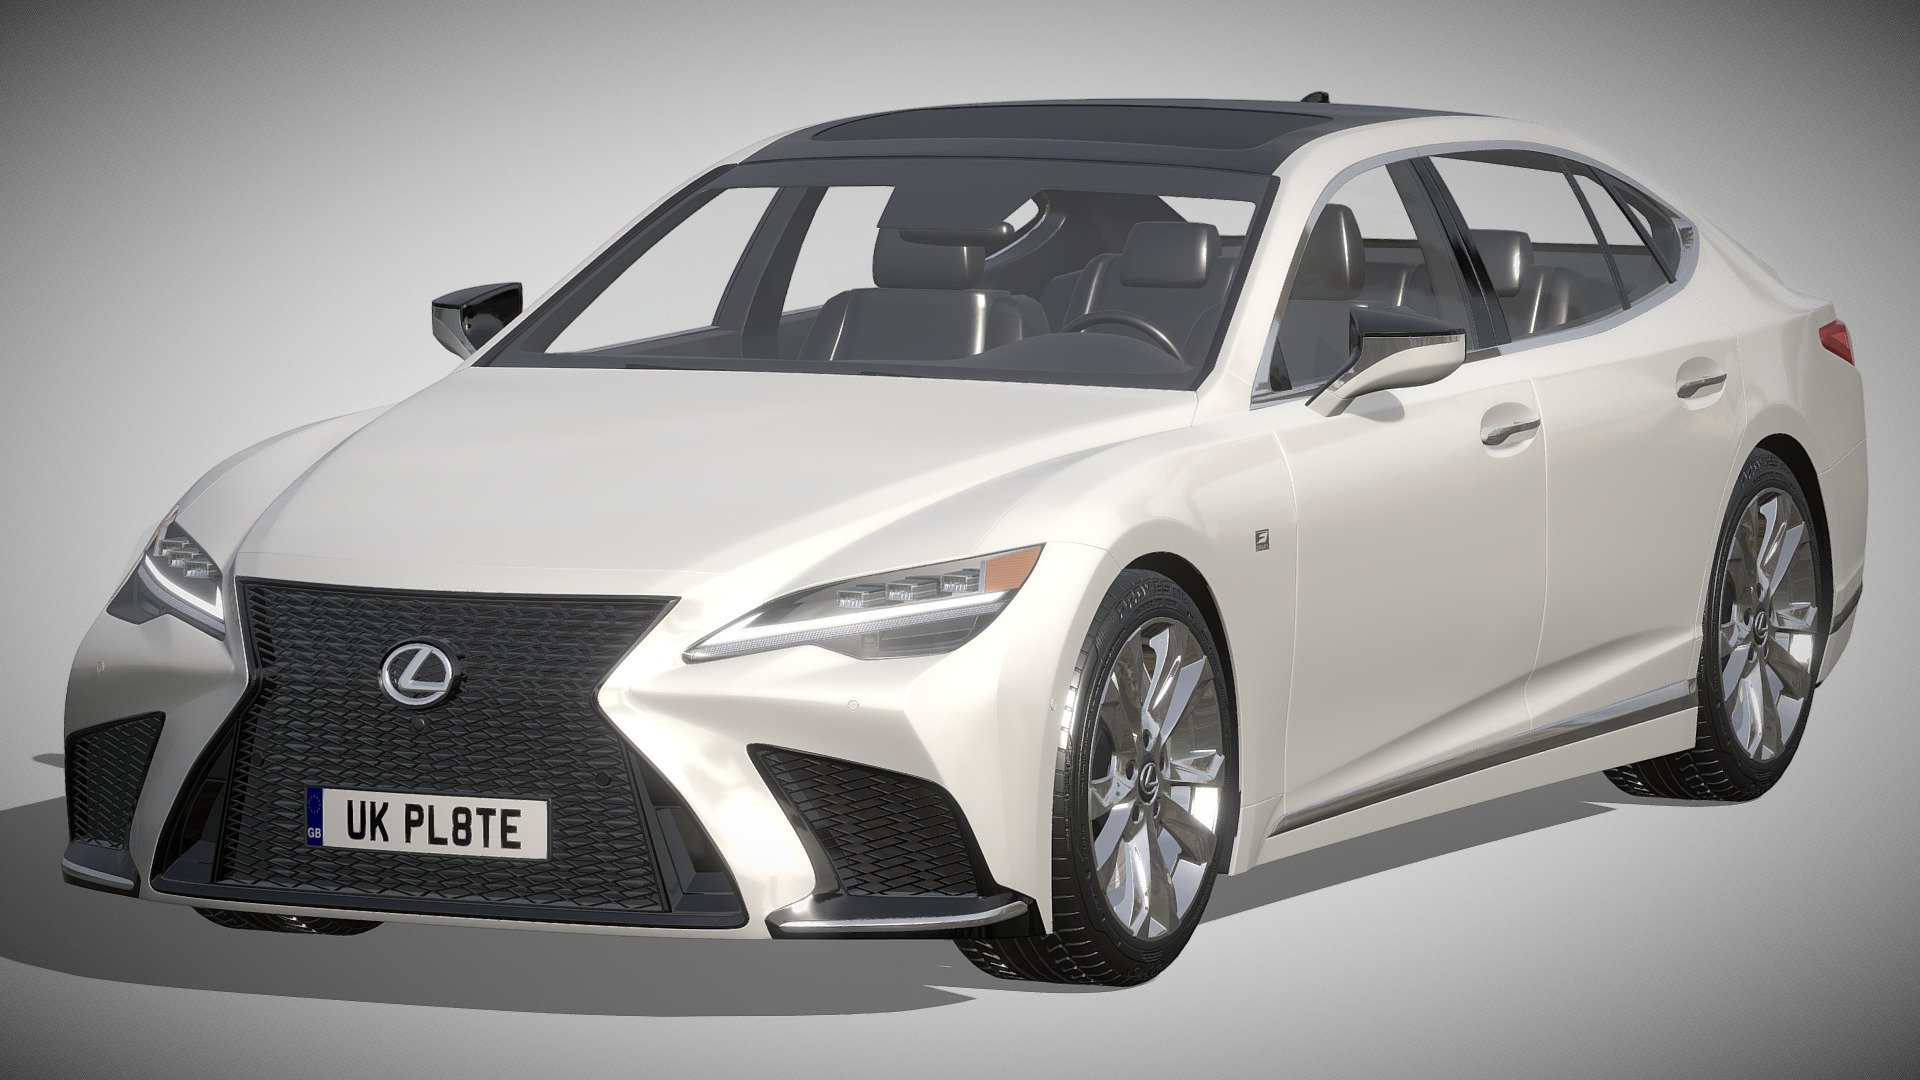 LEXUS LS F-Sport 2022

https://www.lexus.com/models/LS

Clean geometry Light weight model, yet completely detailed for HI-Res renders. Use for movies, Advertisements or games

Corona render and materials

All textures include in *.rar files

Lighting setup is not included in the file! - LEXUS LS F-Sport 2022 - Buy Royalty Free 3D model by zifir3d 3d model